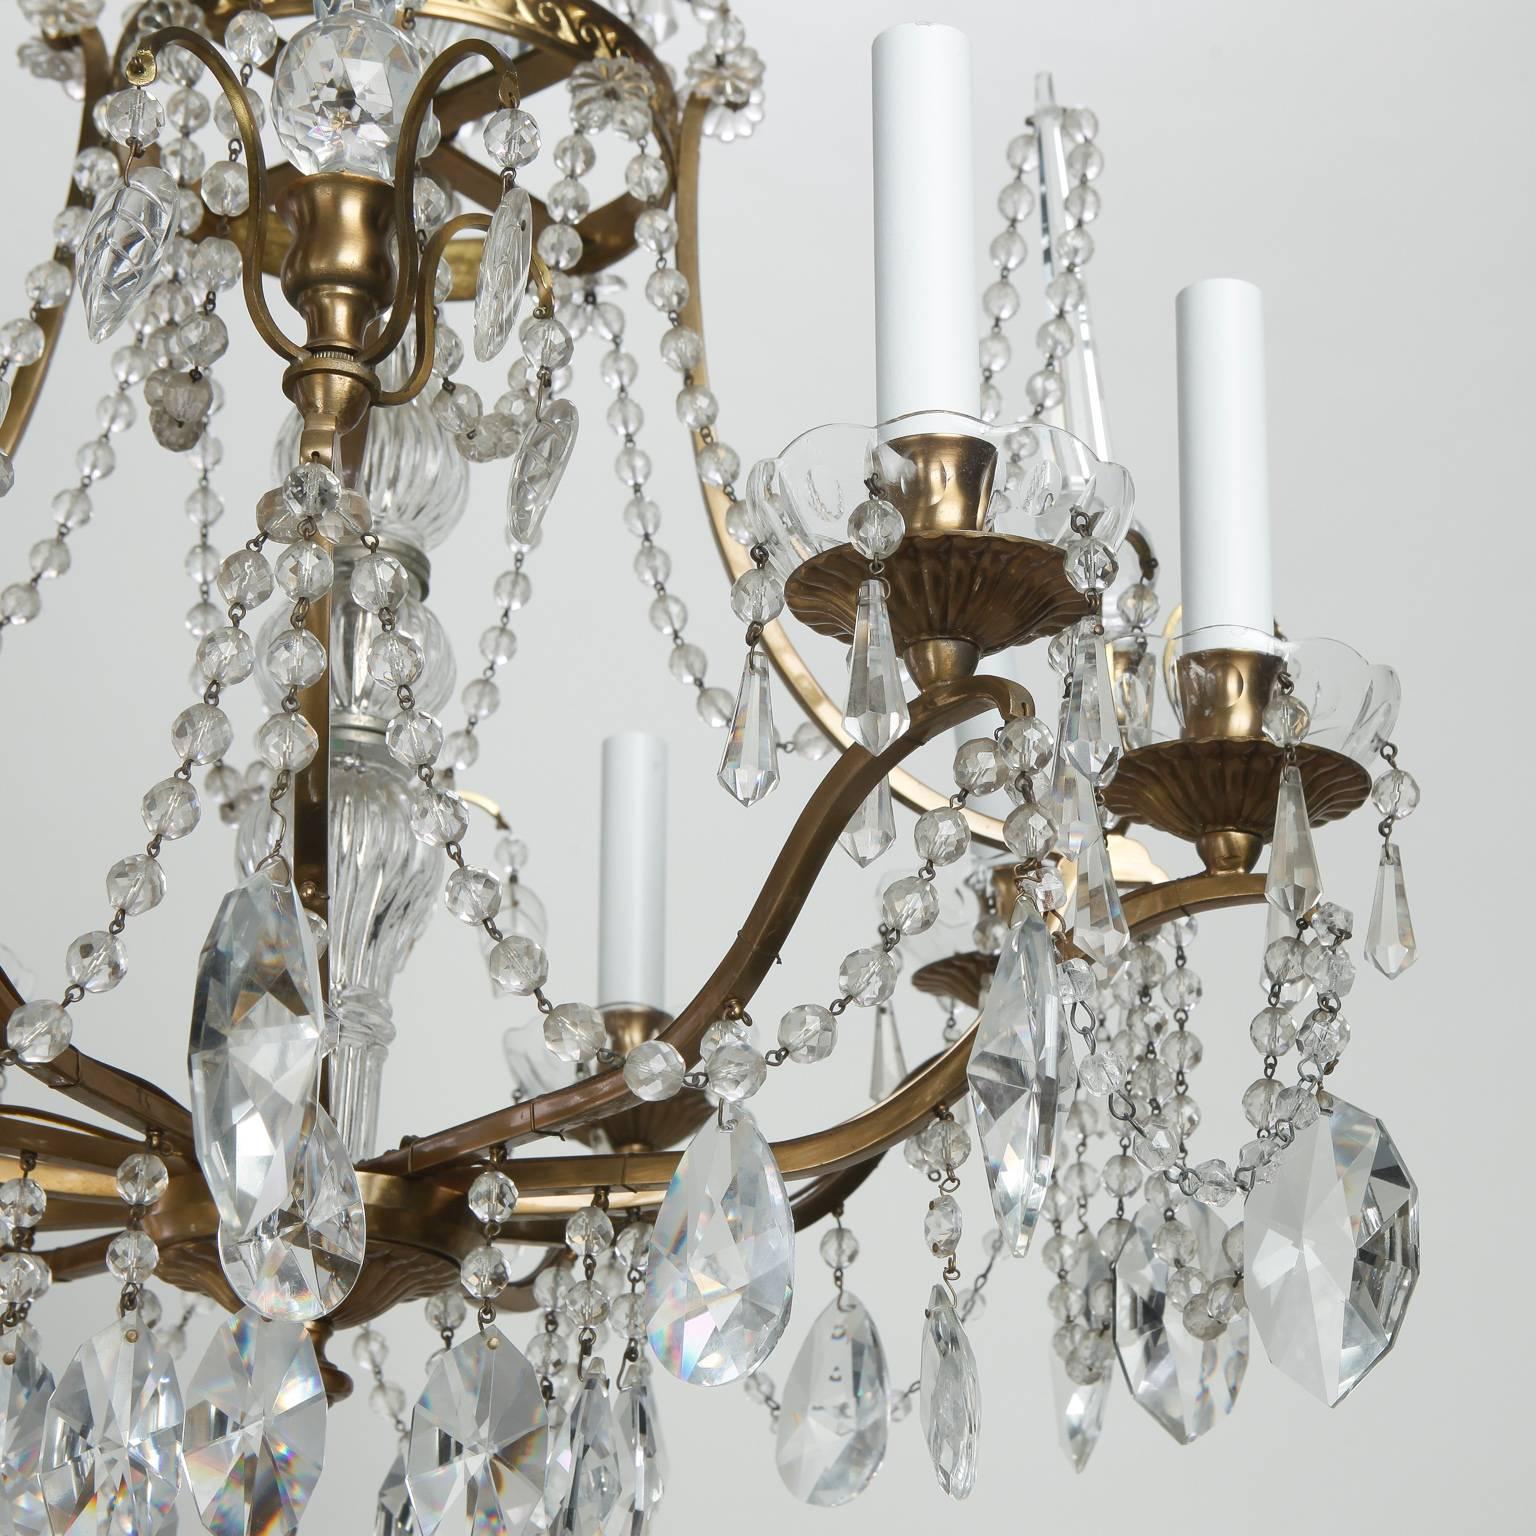 Italian Eight-Arm Chandelier with Crystal Spears and Swagged Beads 1